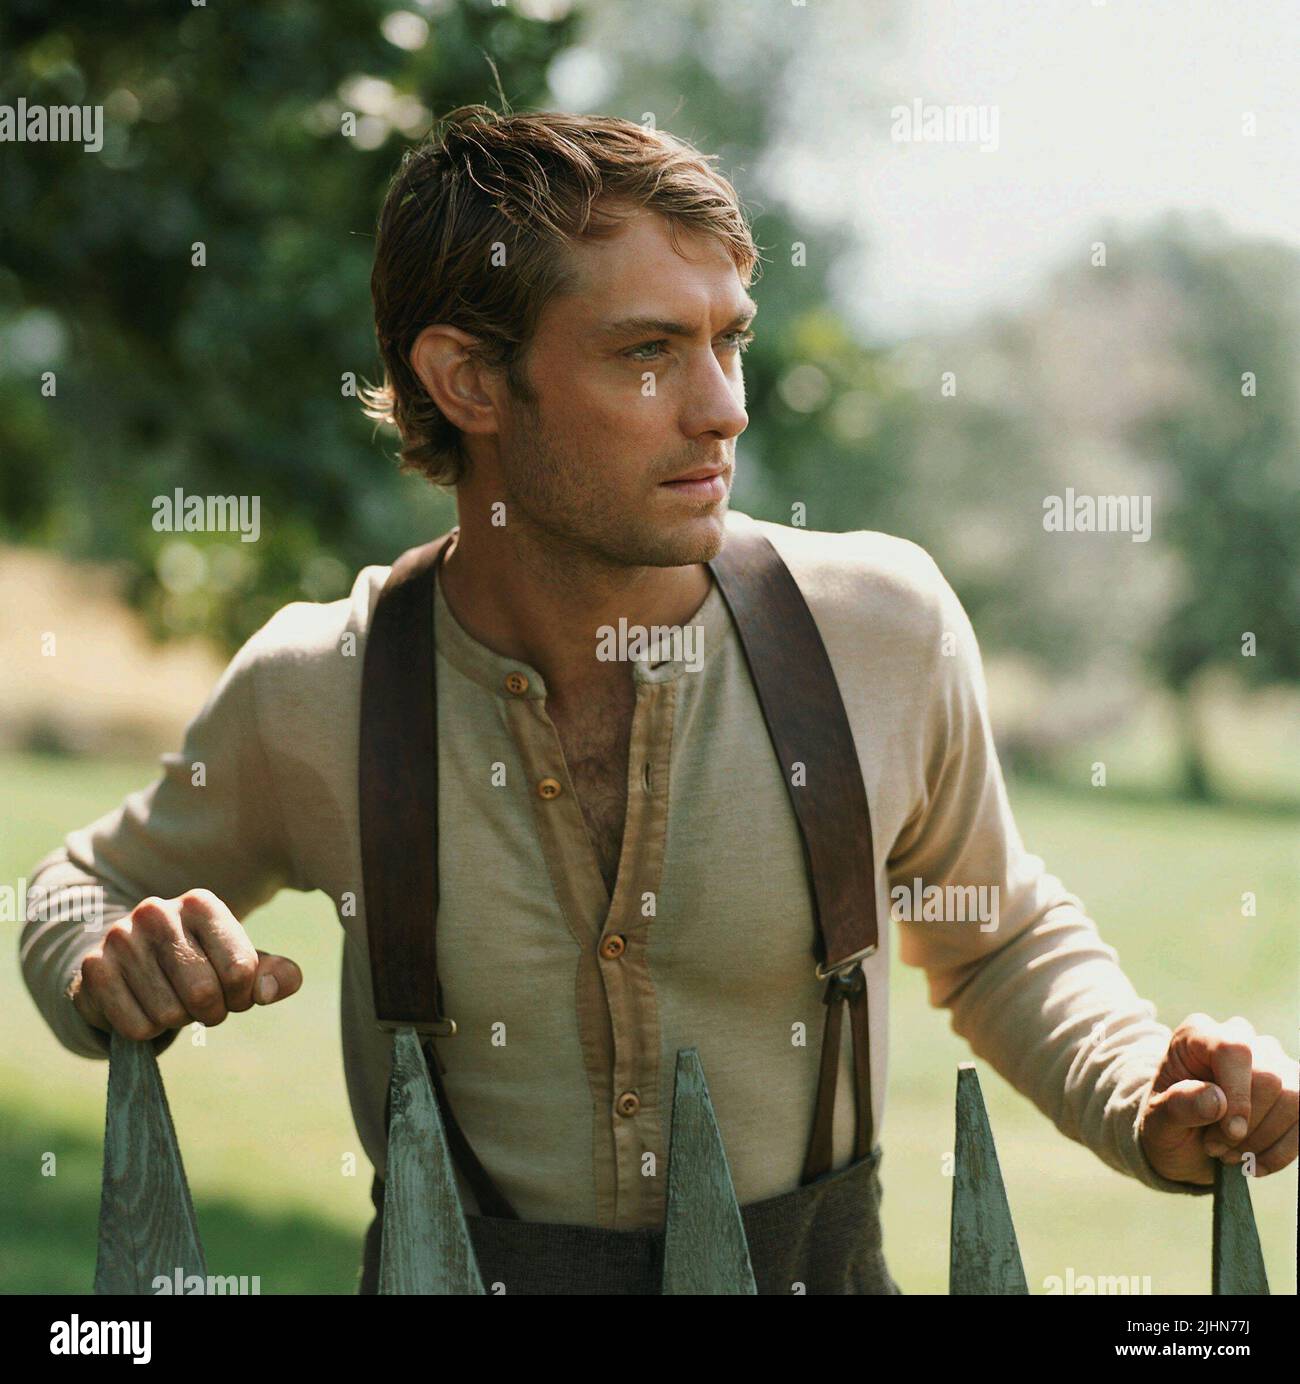 jude law cold mountain movie